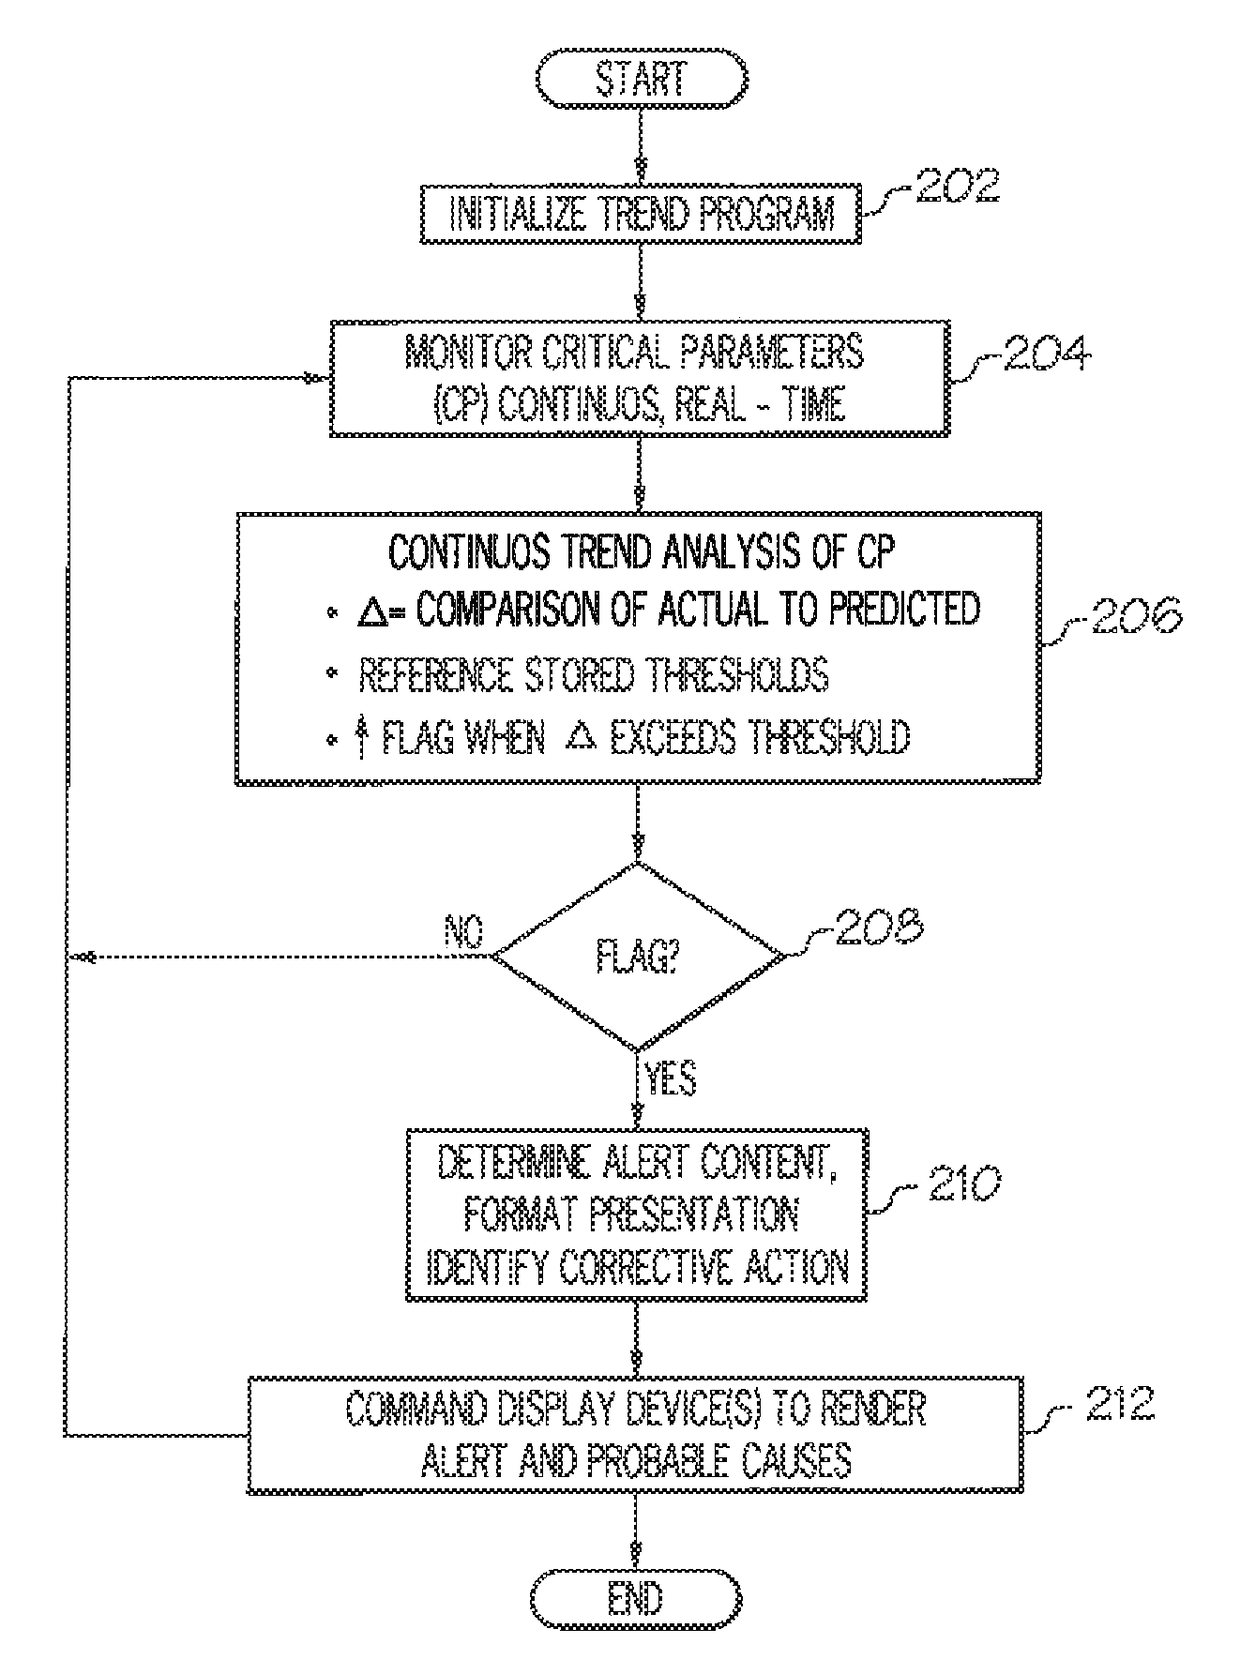 Systems and methods for trend monitoring and event prediction